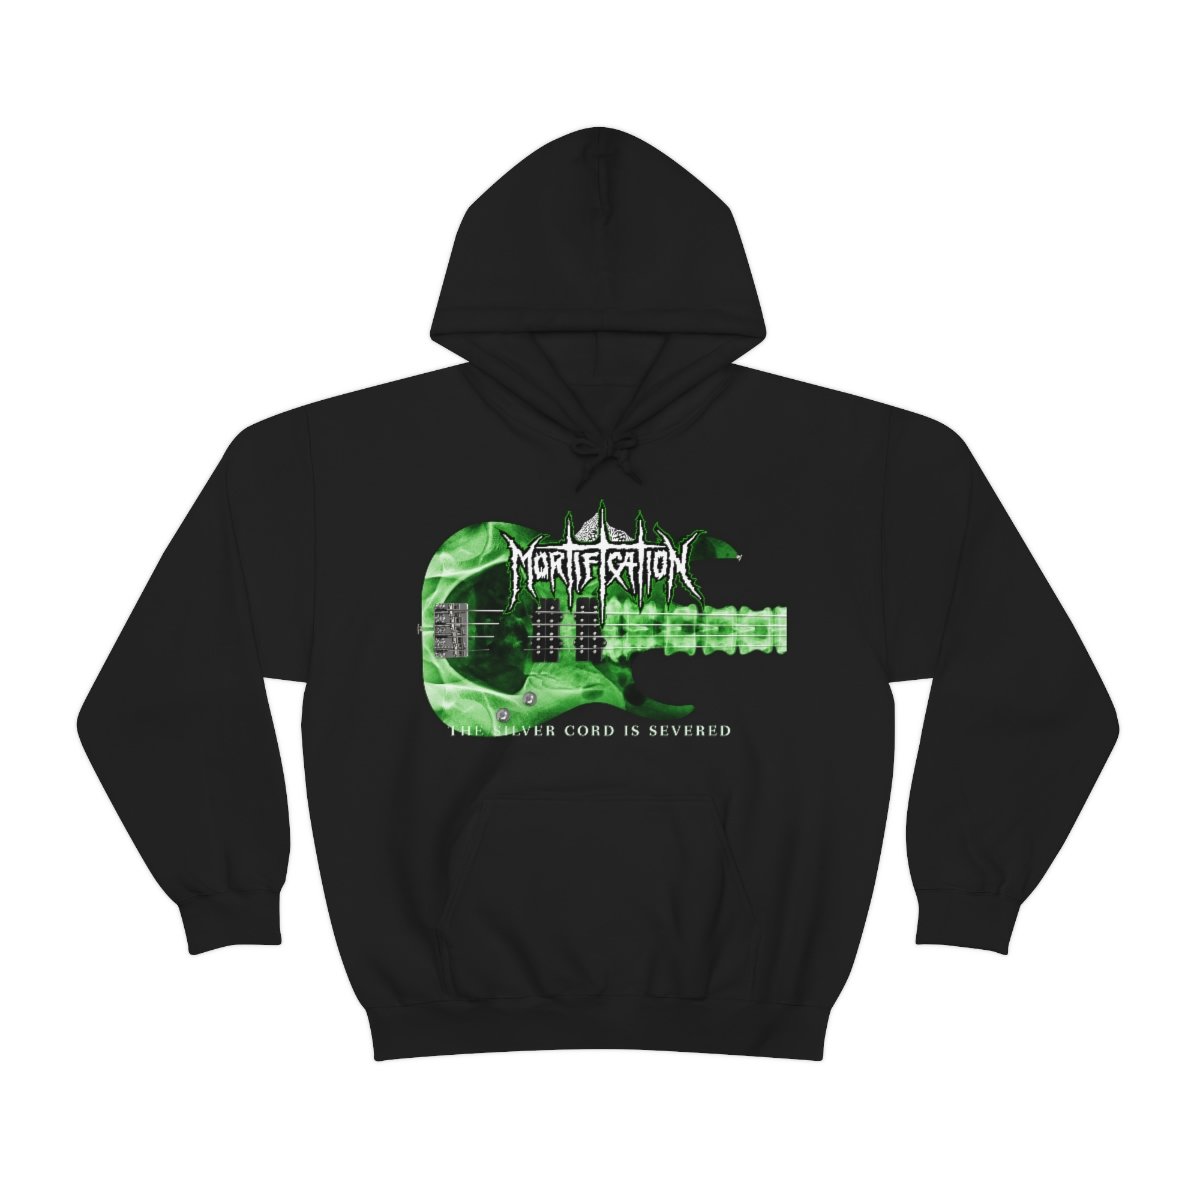 Mortification – The Silver Cord is Severed 2021 Pullover Hooded Sweatshirt